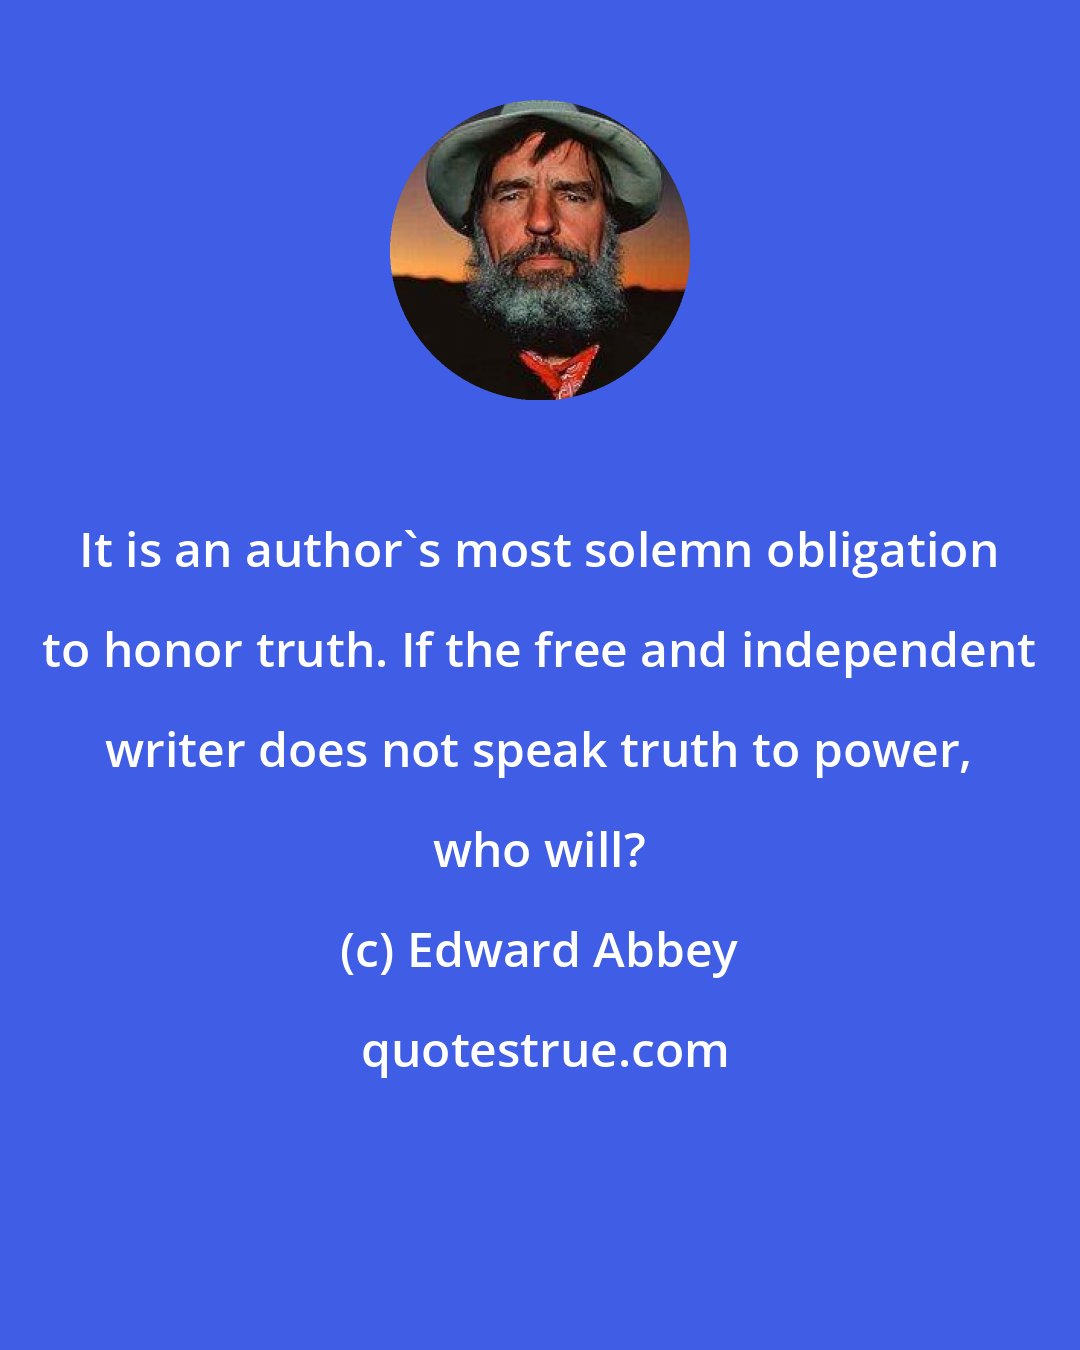 Edward Abbey: It is an author's most solemn obligation to honor truth. If the free and independent writer does not speak truth to power, who will?